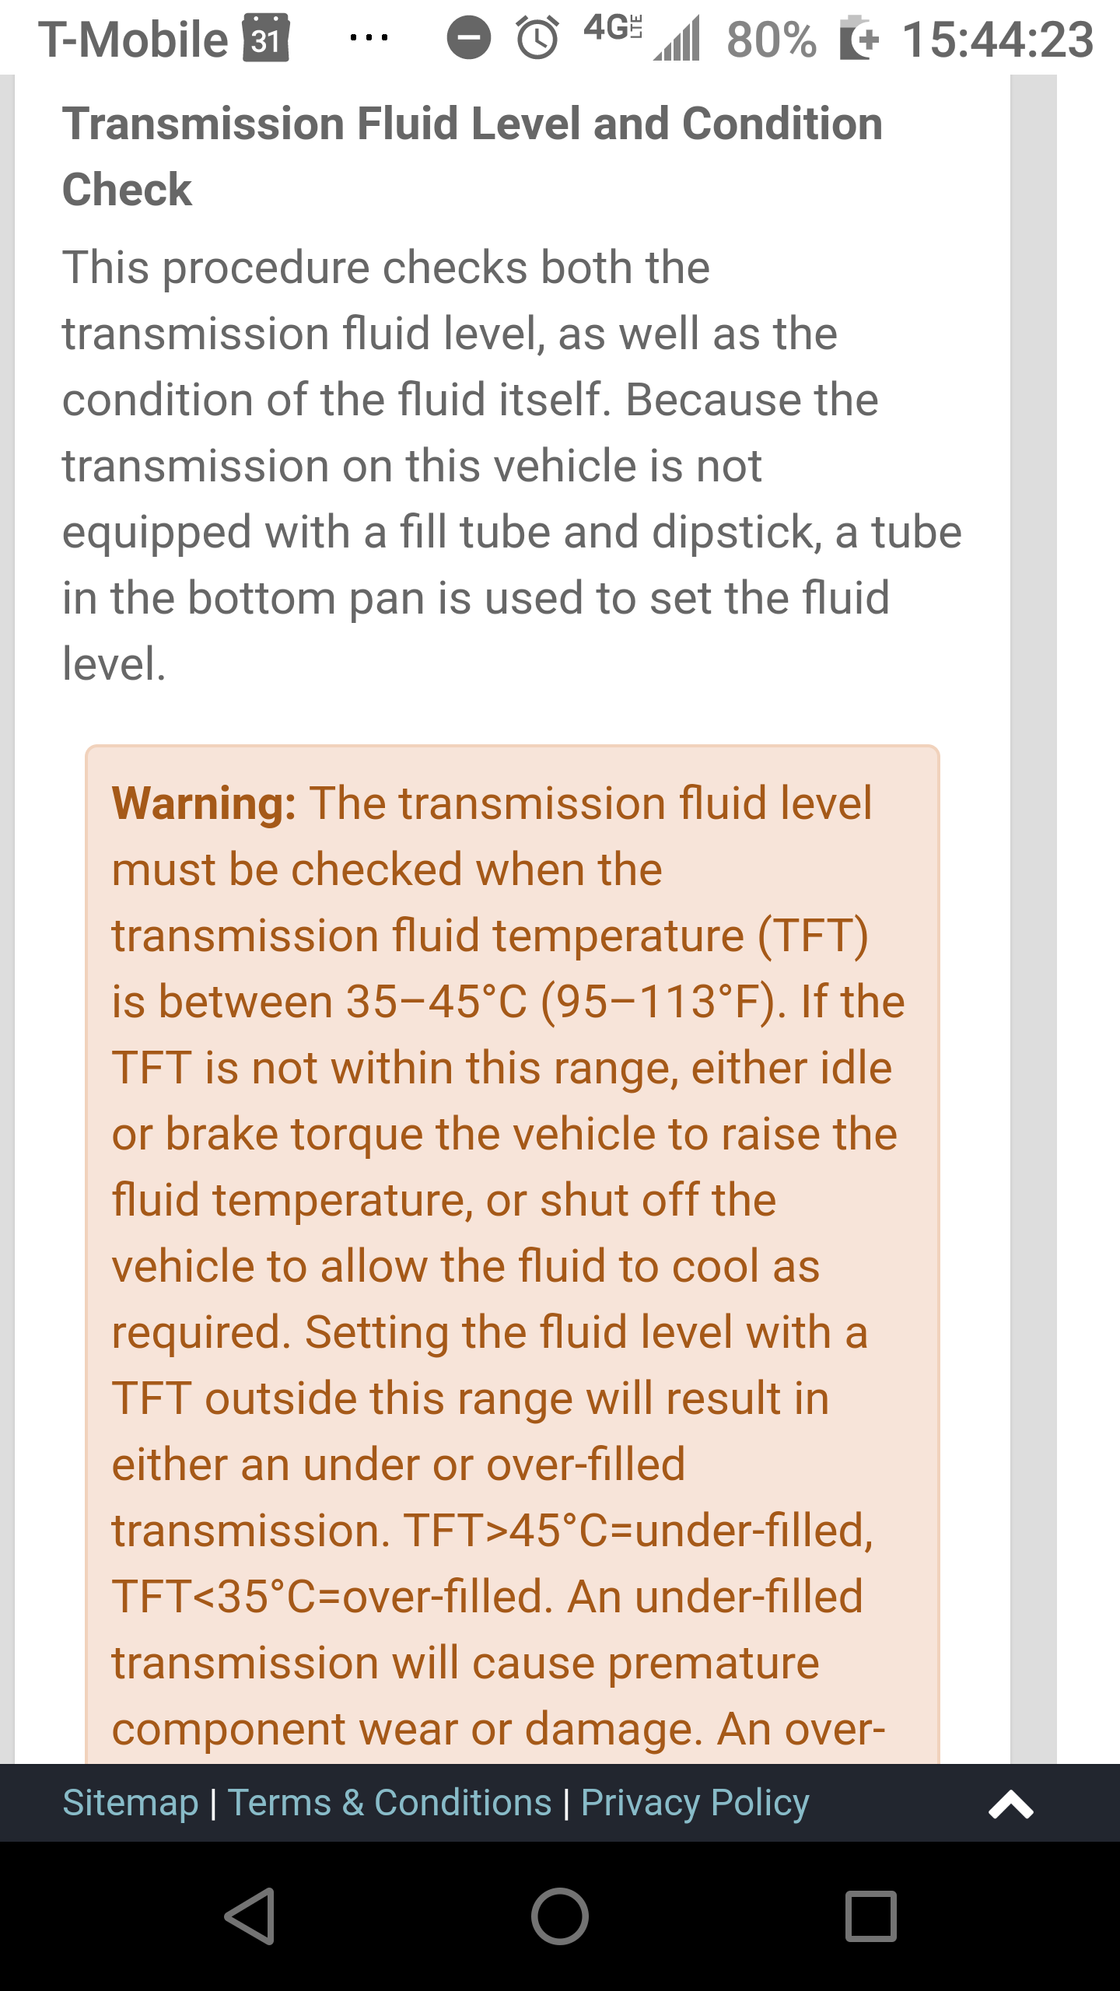 How To: Tranny Flush with Mobil 1 Synthetic LV ATF HP without dropping the  pan - CorvetteForum - Chevrolet Corvette Forum Discussion